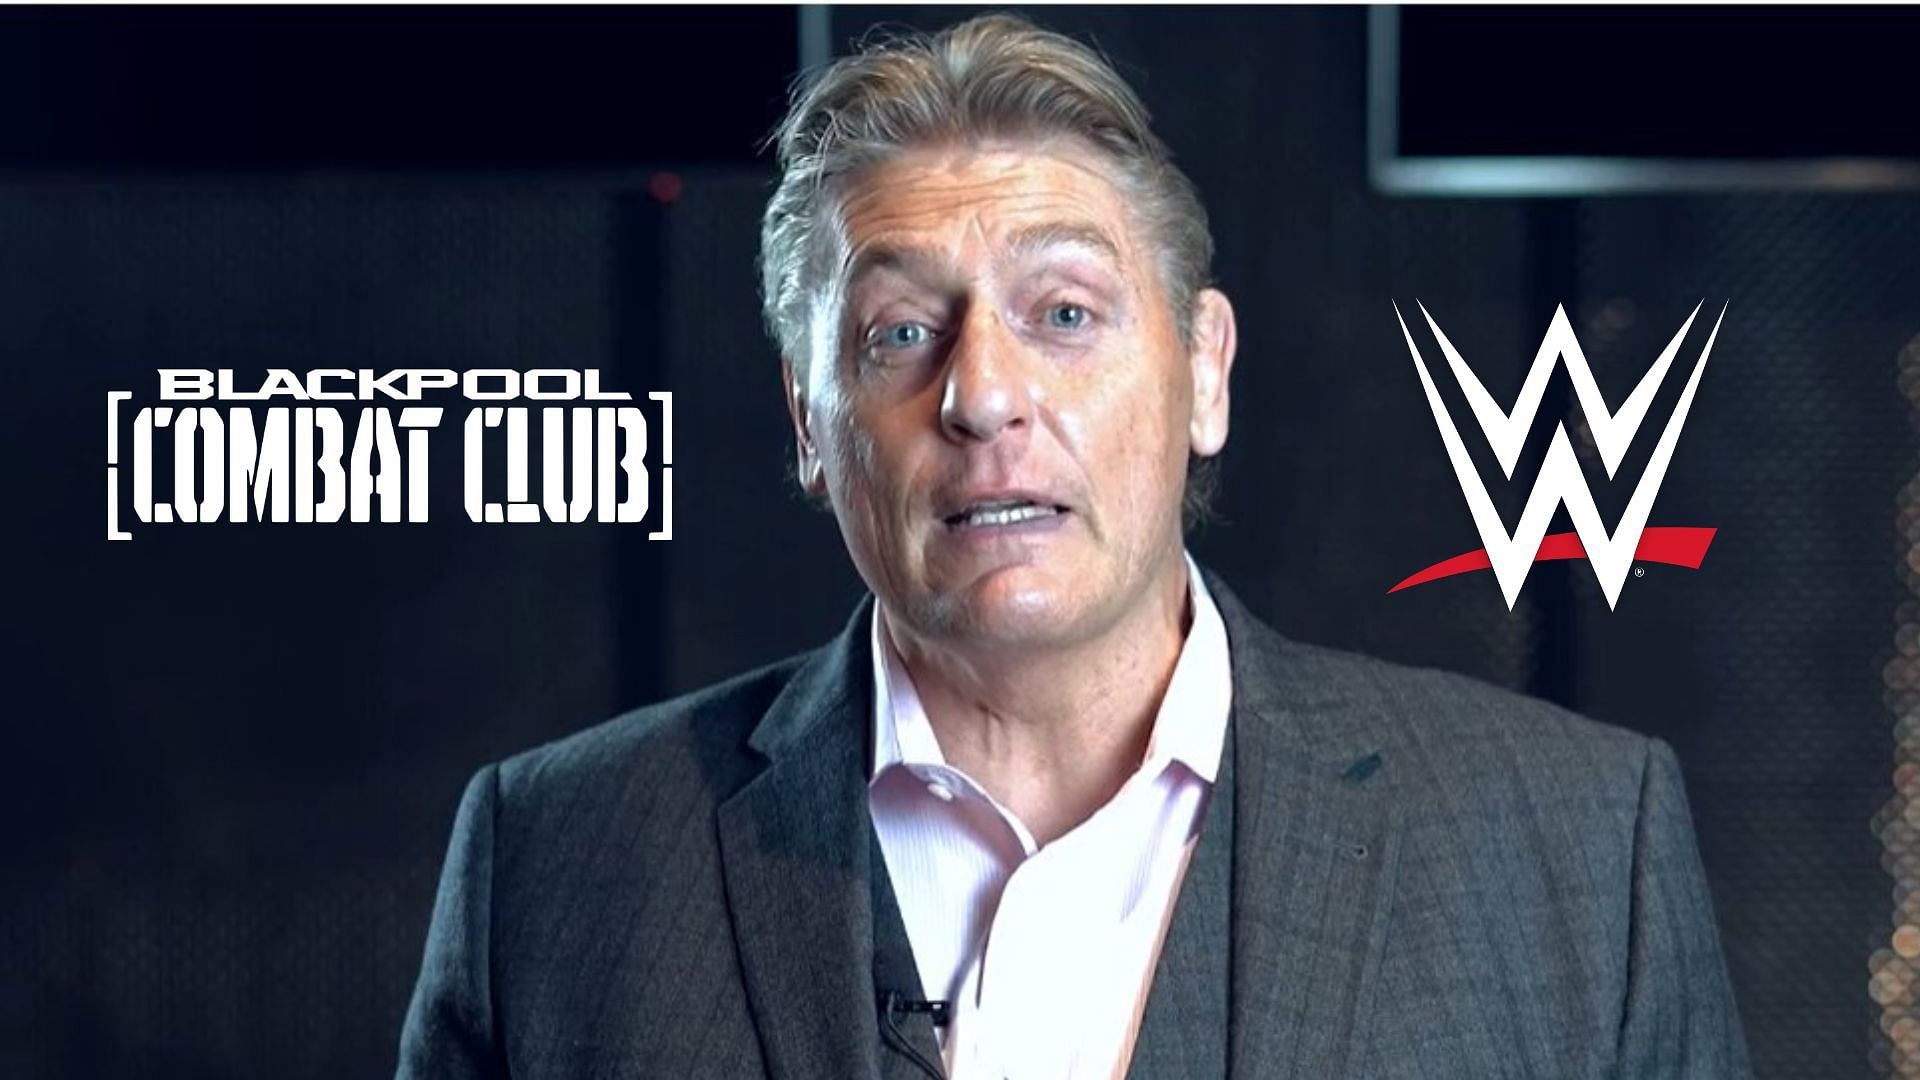 William Regal seems to have bid farewell to the Blackpool Combat Club